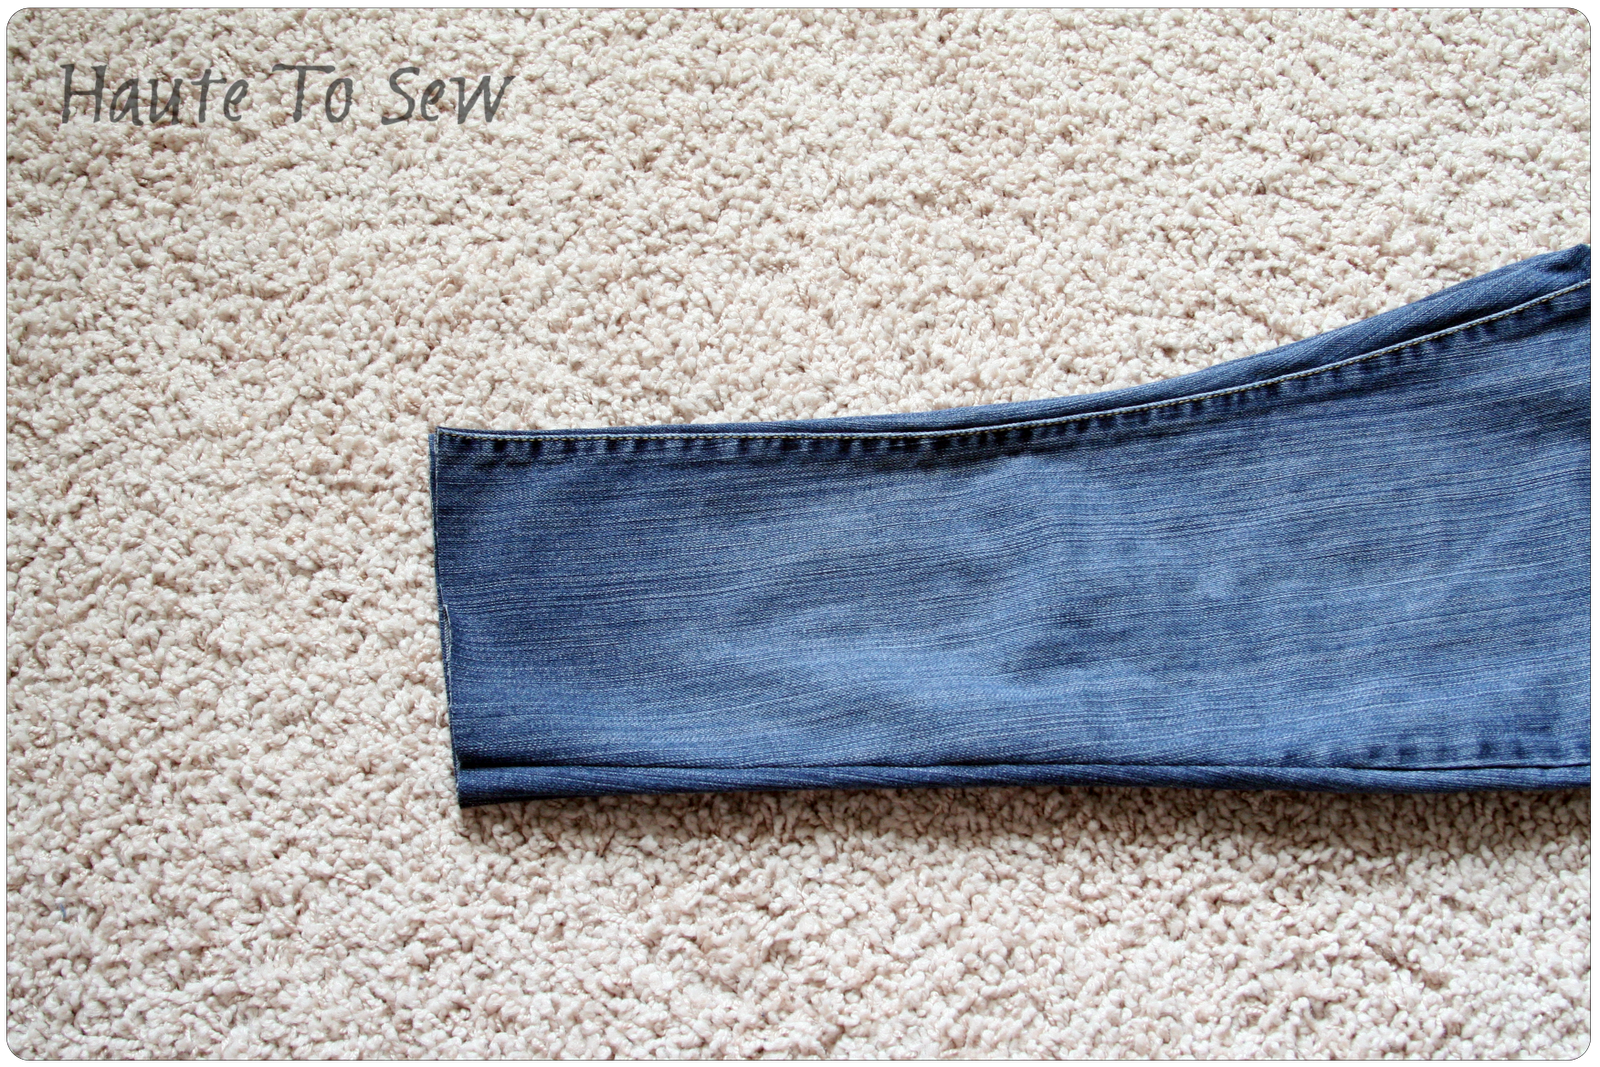 Haute To Sew: {Sewing Tip Tuesday} #11